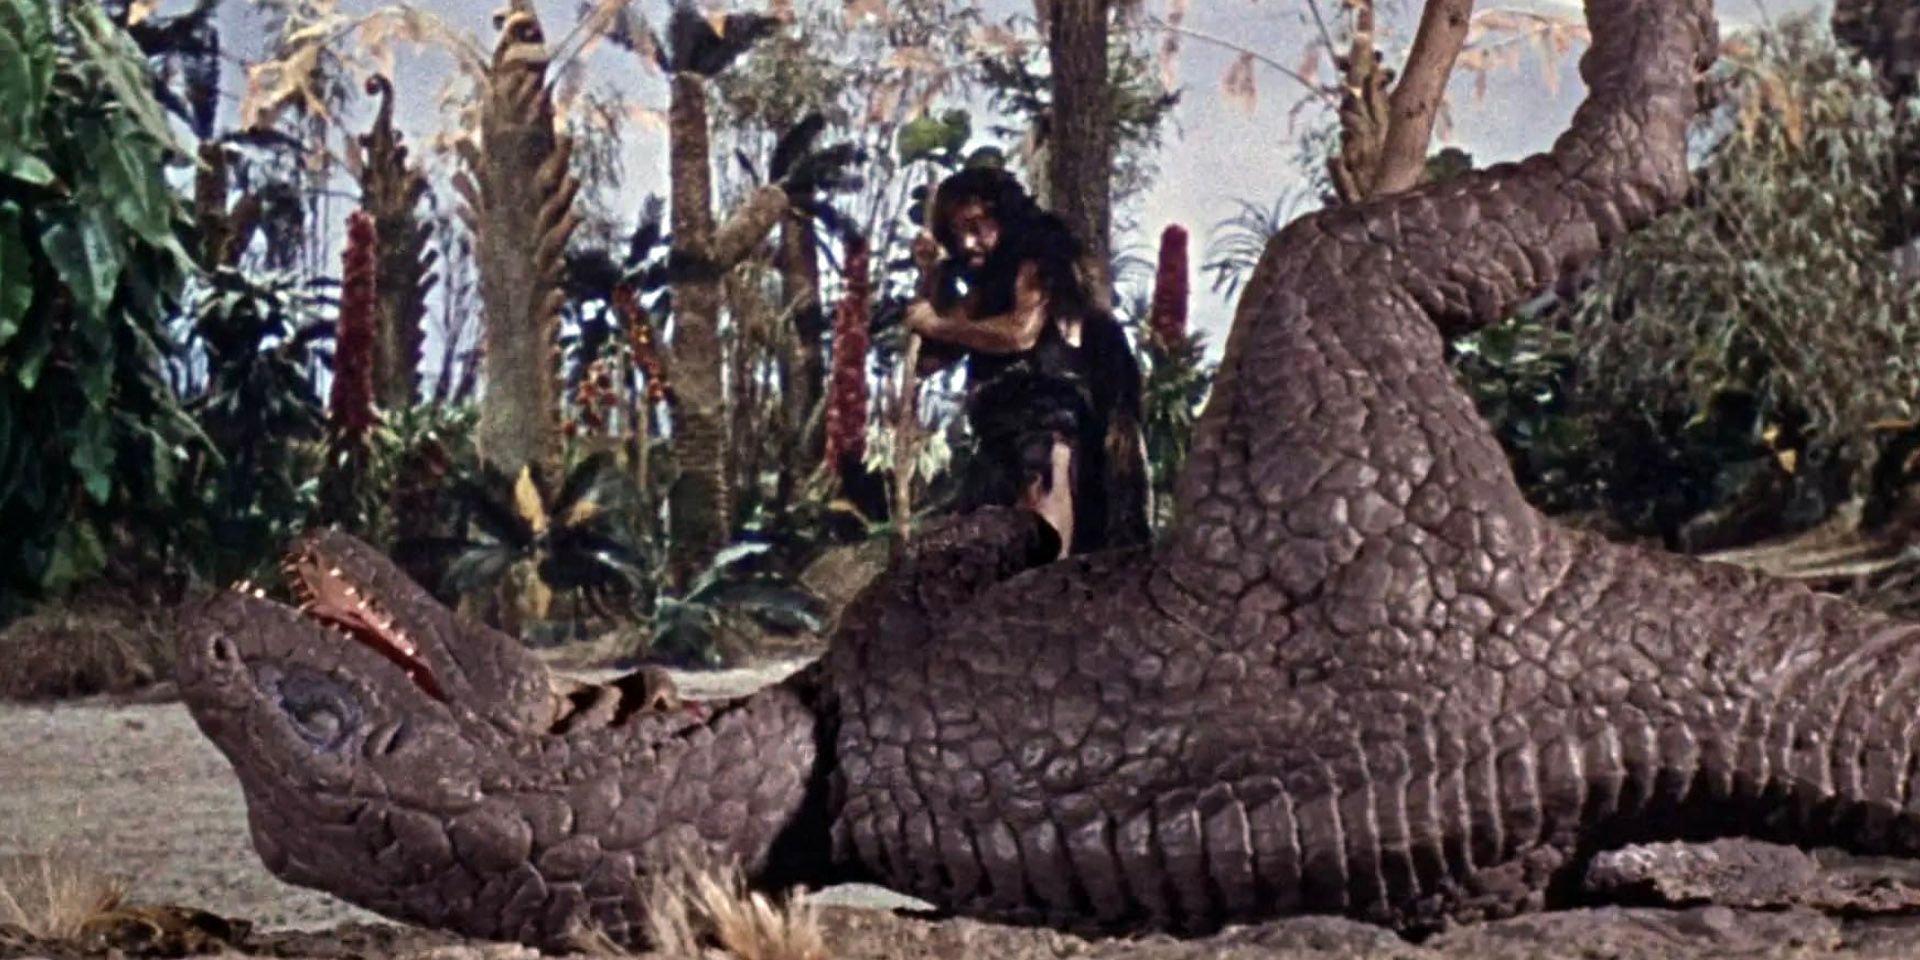 A caveman fights a dinosaur in One Million Years B.C.